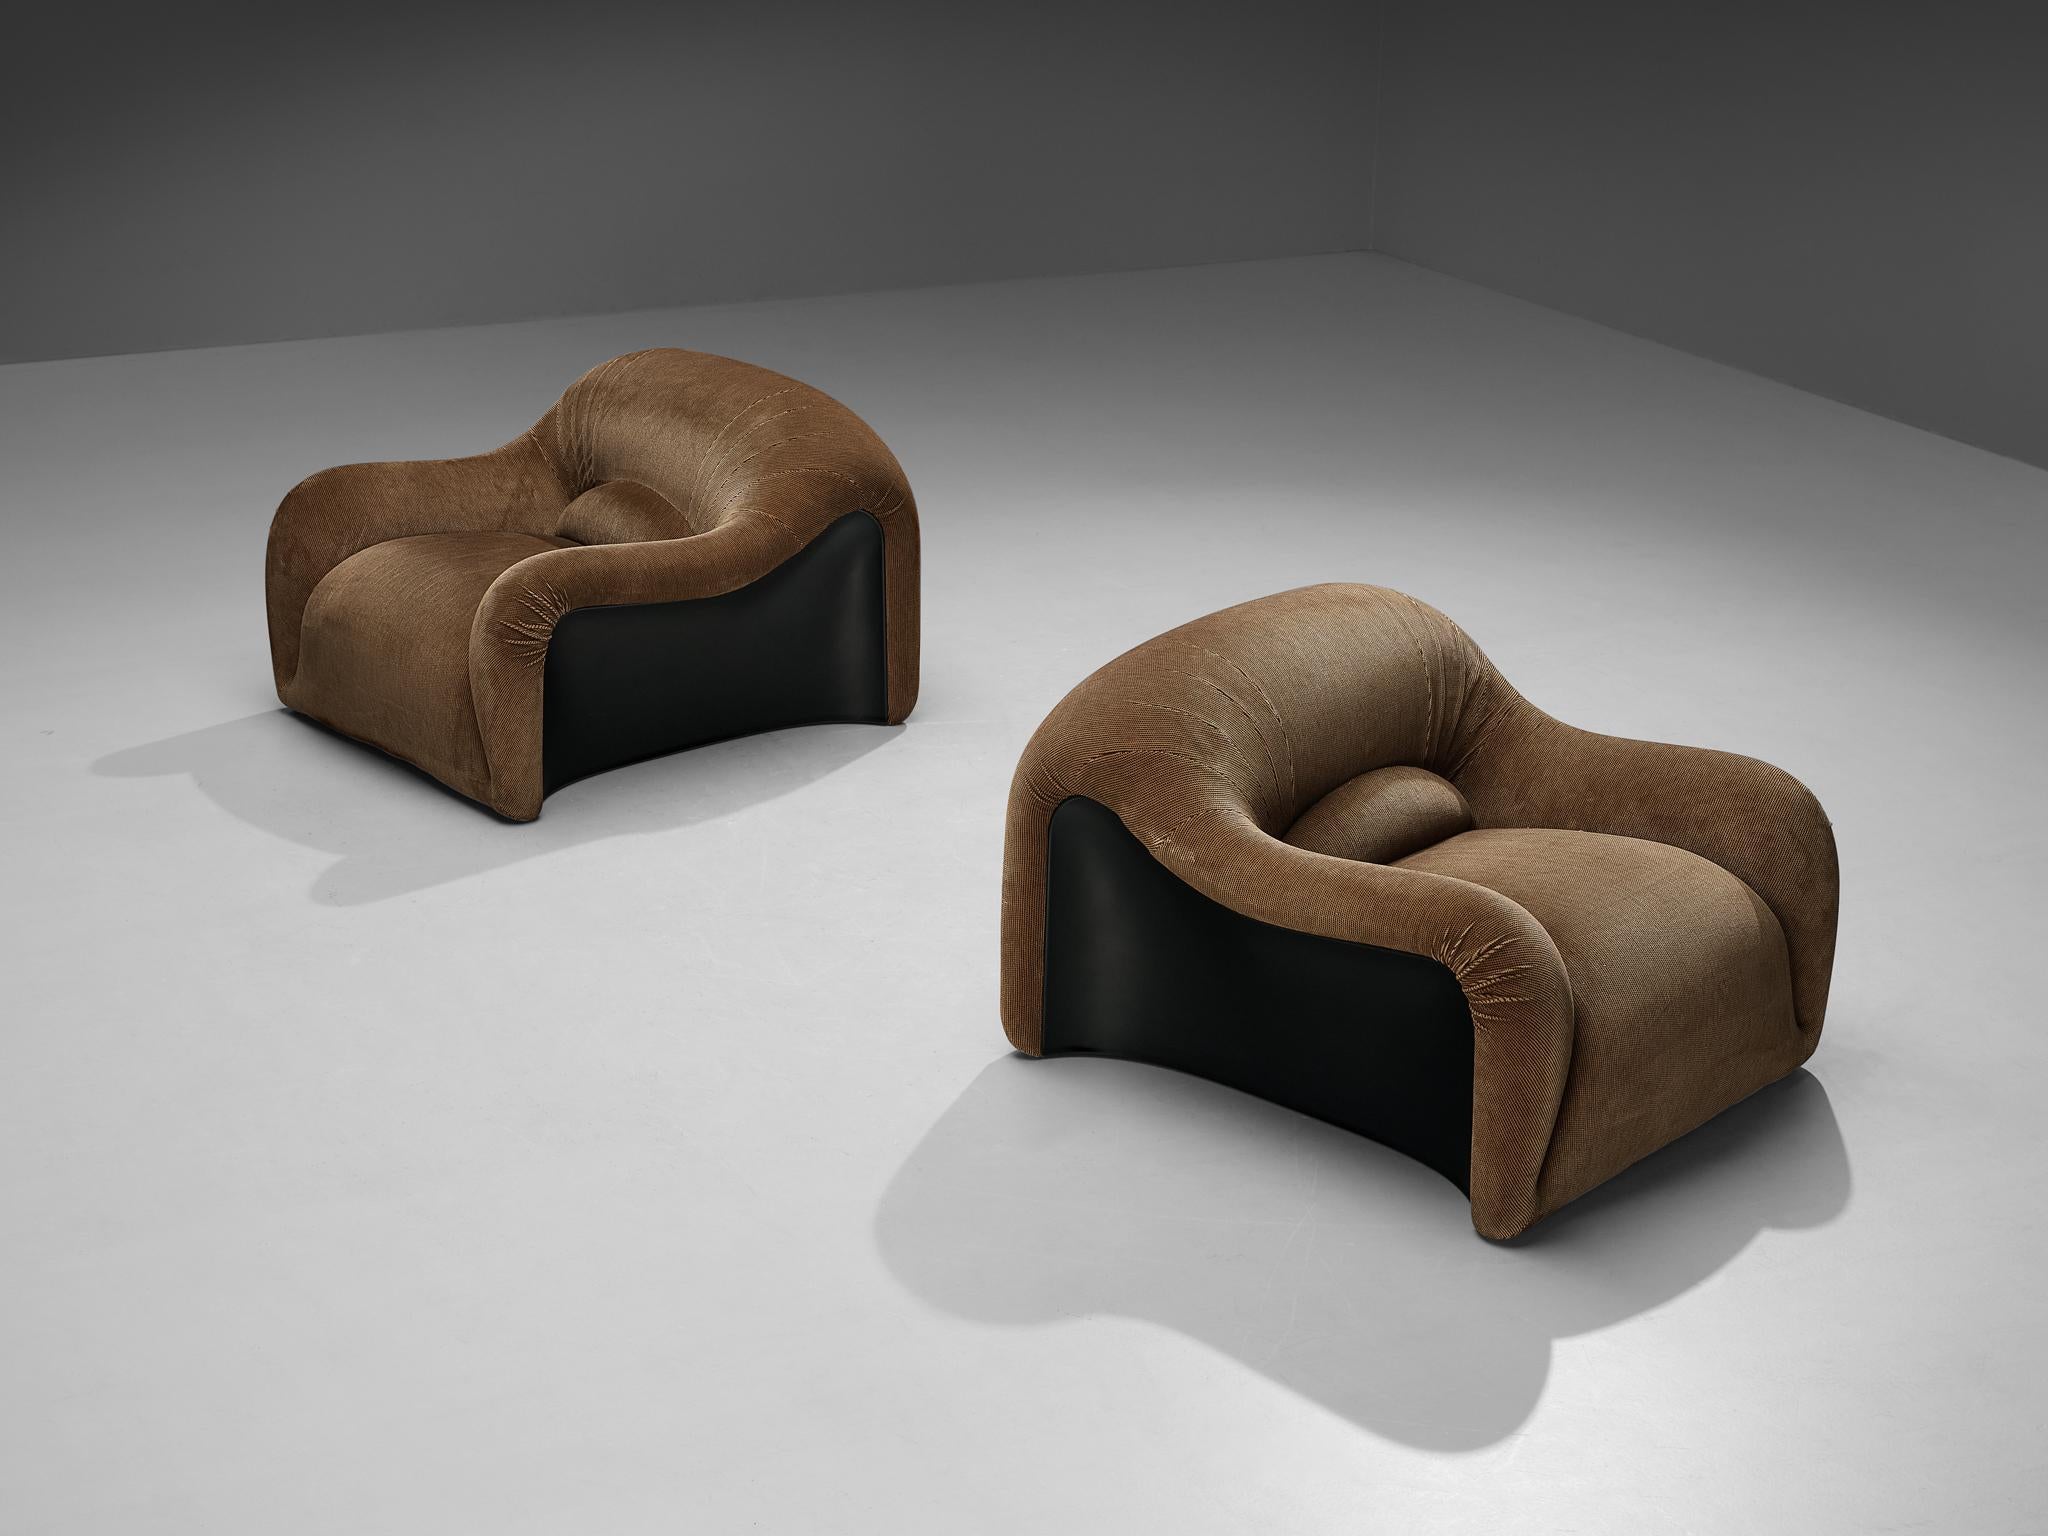 Emilio Guarnacci for 1P, pair of 'Ecuba' lounge chairs, Acrylonitrile butadiene styrene, foam, fabric, Italy, design 1969 

Stunning pair of lounge chairs by Italian designer Emilio Guarnacci. These chairs form a beautiful and organic appearing